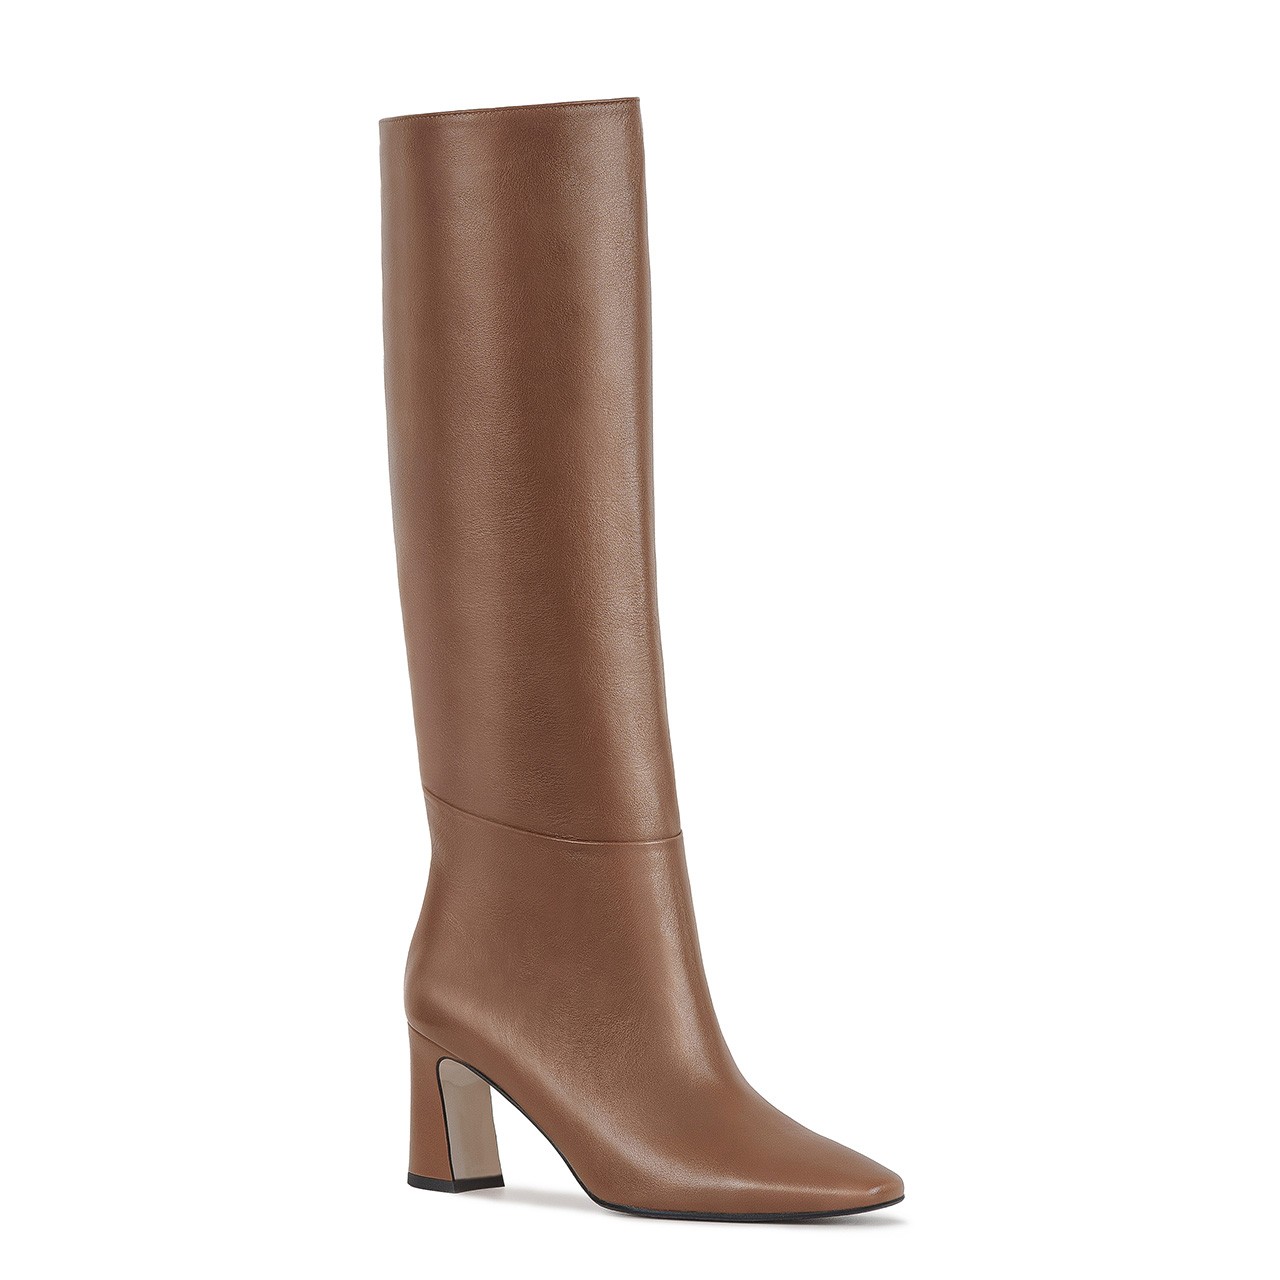 Light brown leather boots with a thick 9 cm heel